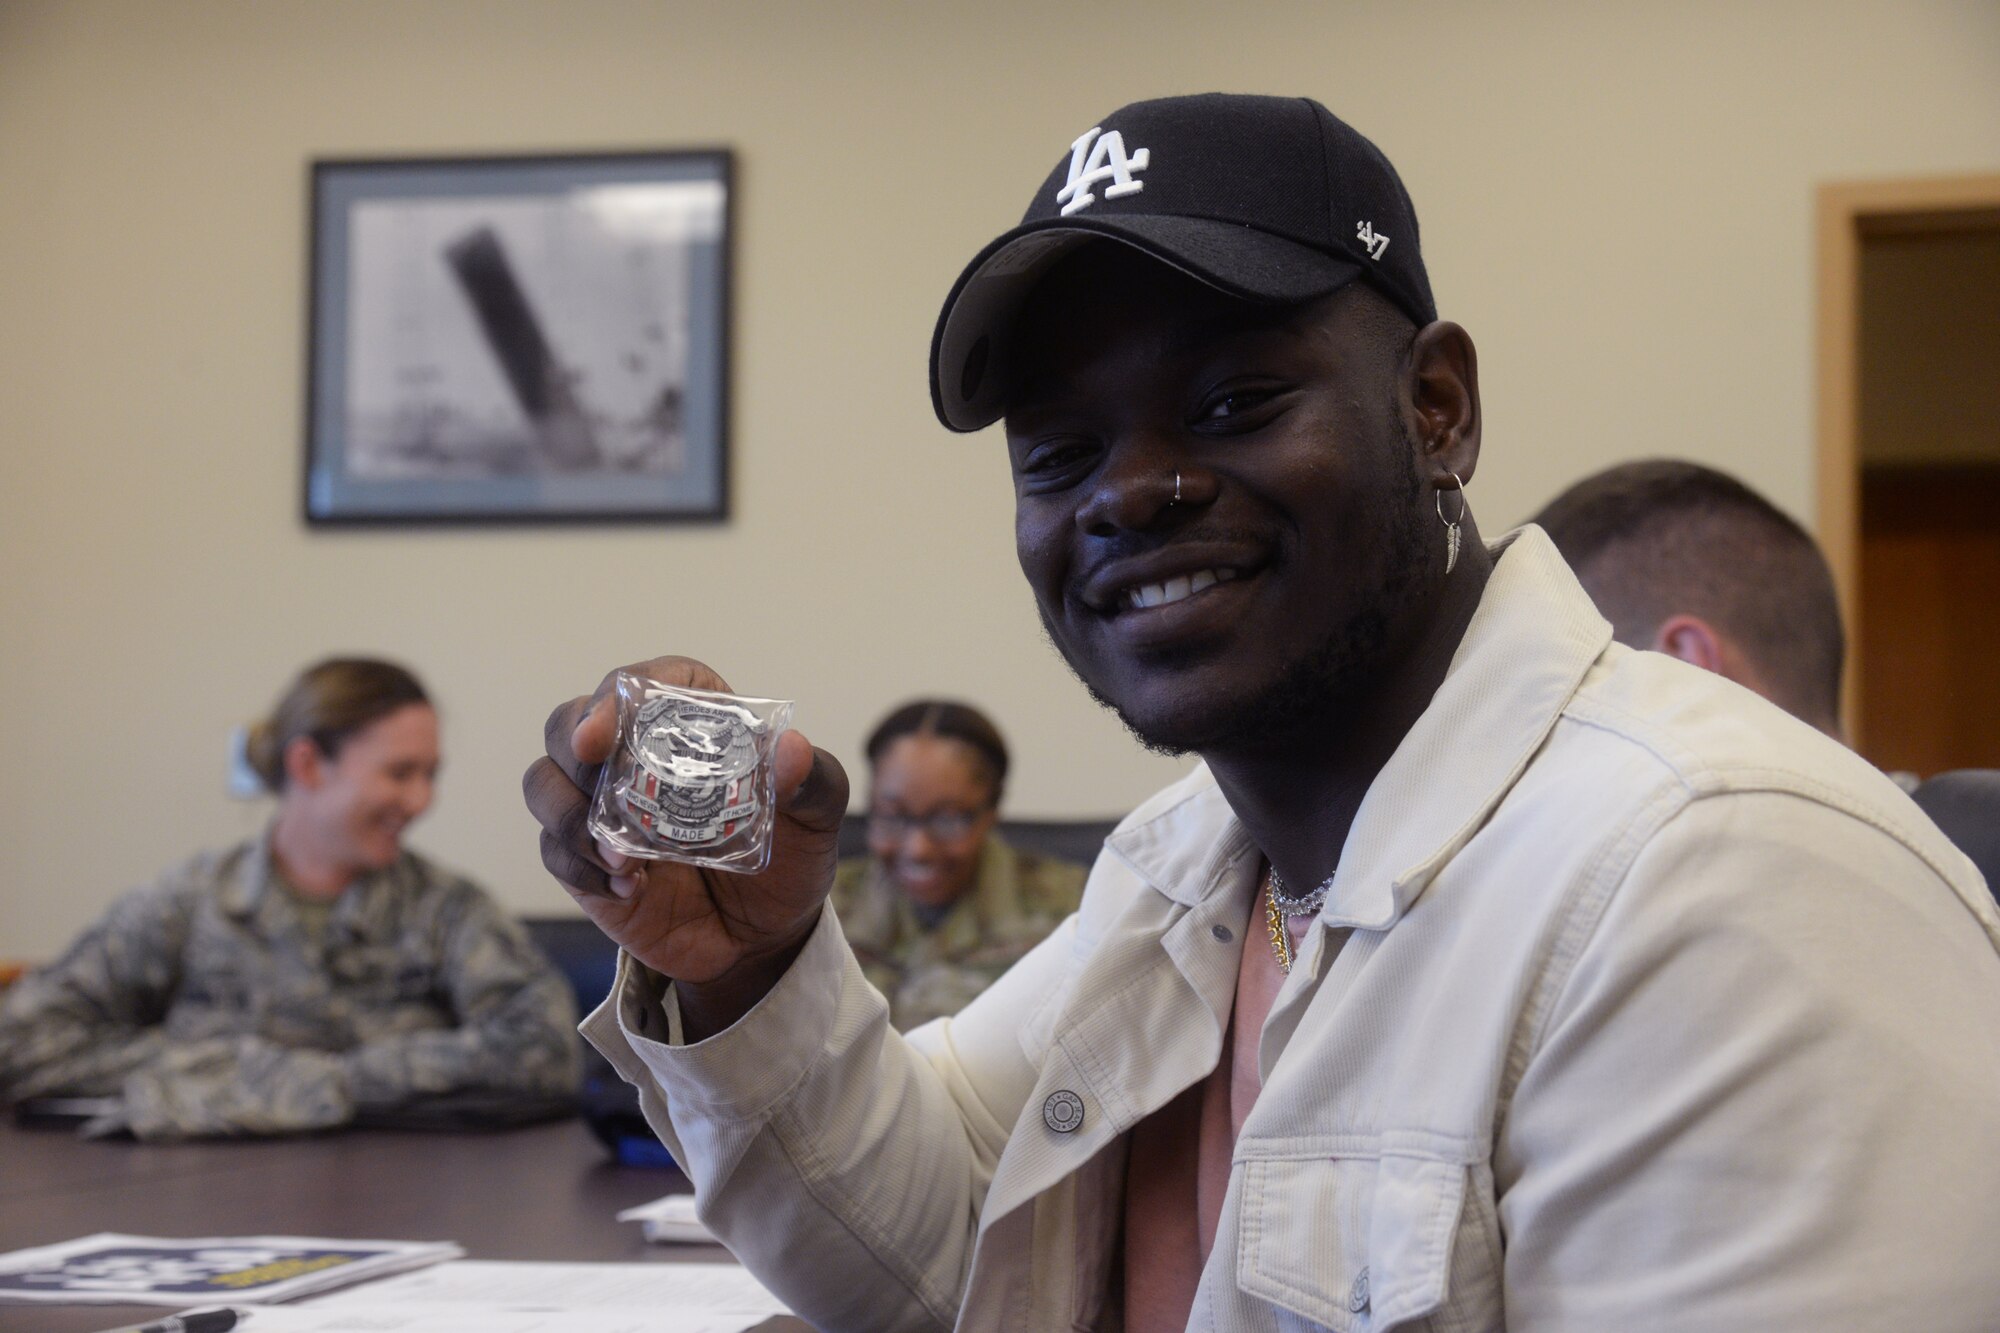 A member of the Air Force Sergeants Association poses with a coin July 10, 2019, at Malmstrom Air Force Base, Mont.